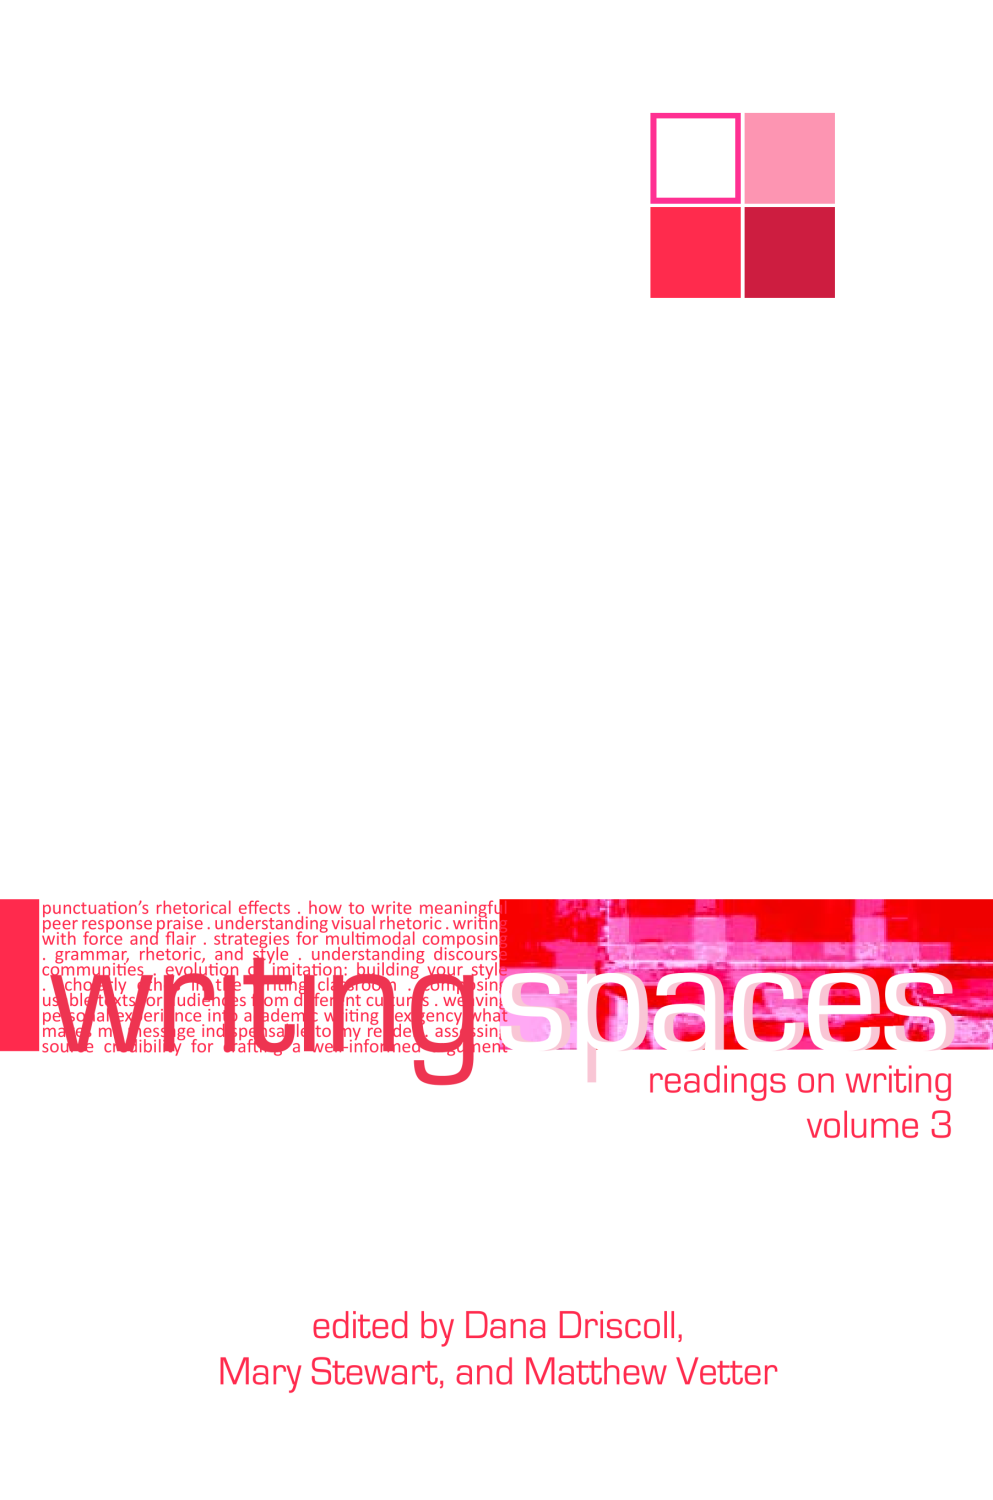 Cover image for Writing Spaces: Readings on Writing, Volume 3